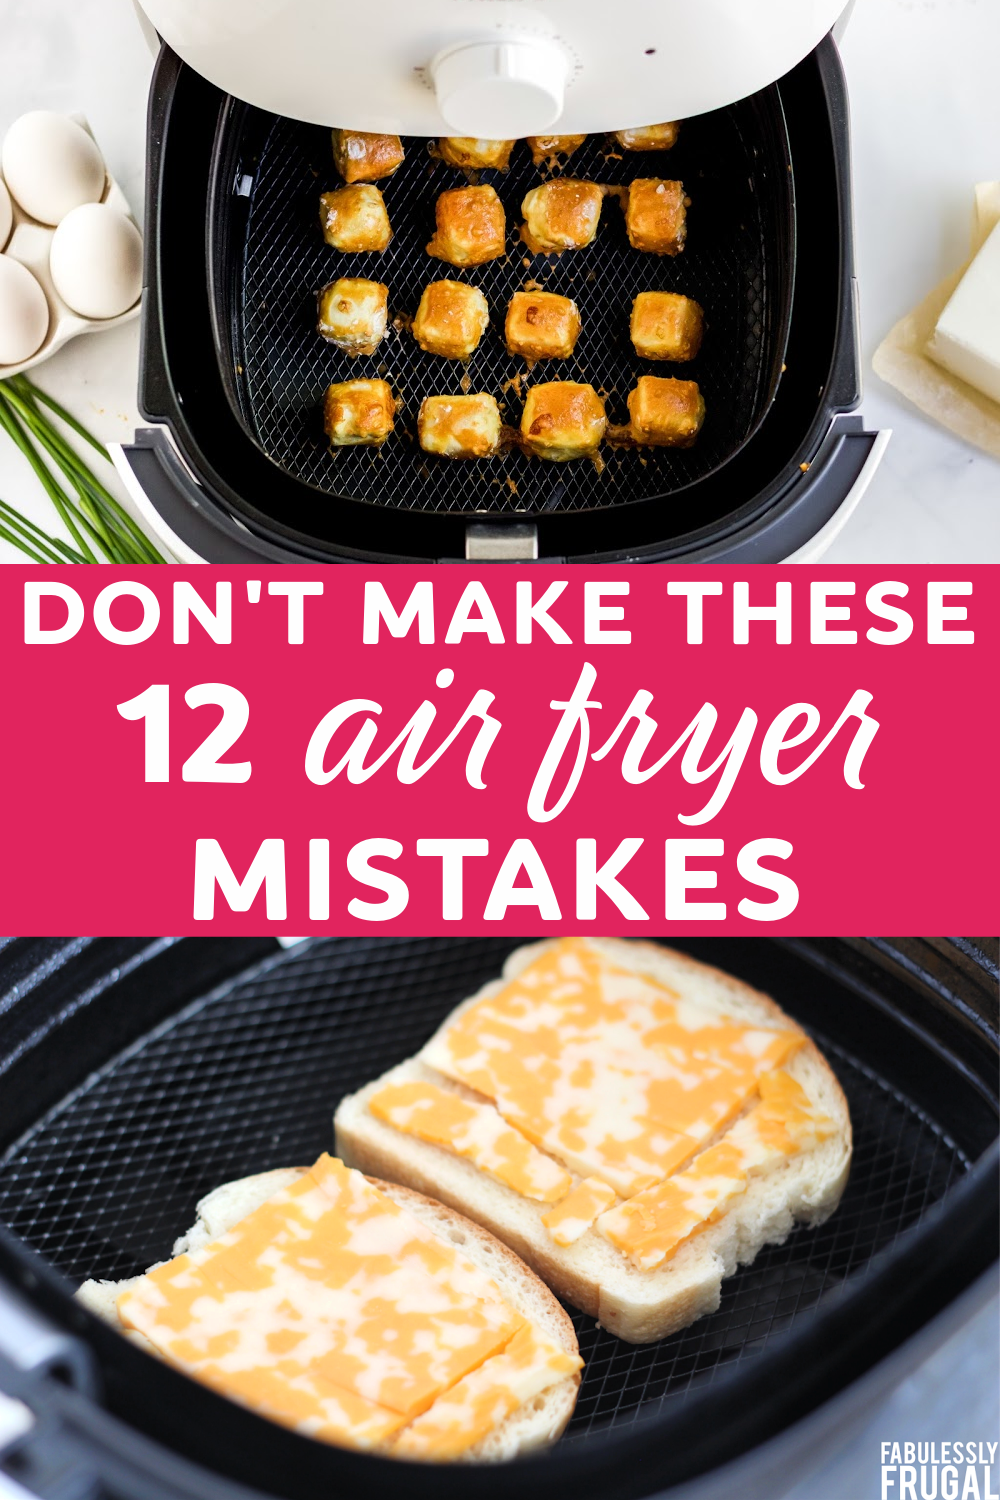 The Do's and Don'ts of Air Frying